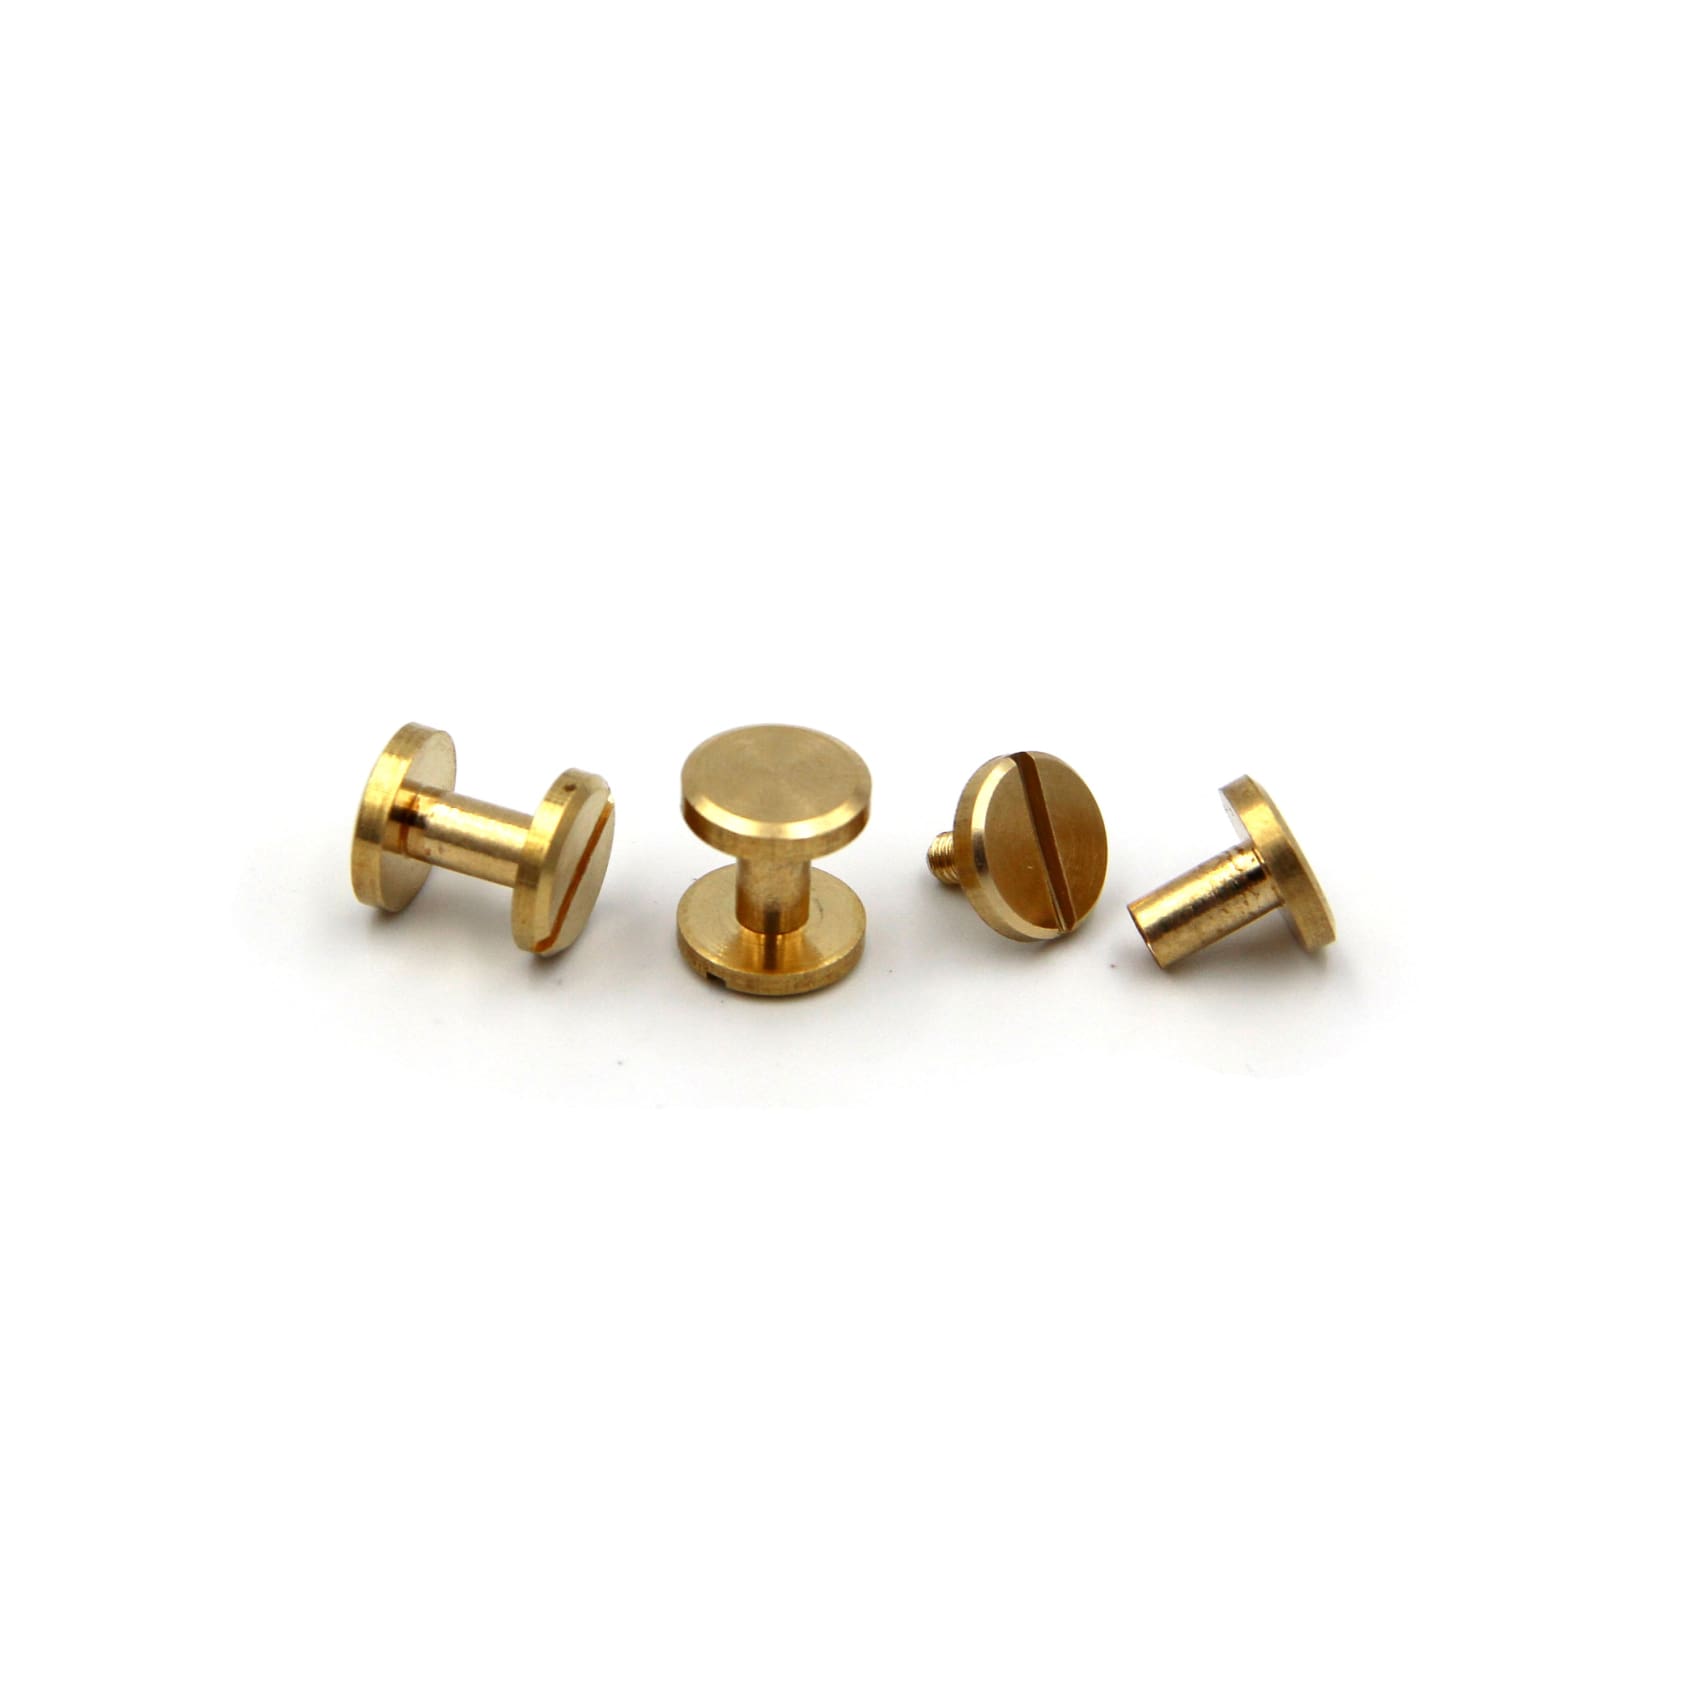 Brass Chicago Screw Rivets 10x4x7mm Leather Crafting Supply - Gold / 1pcs - Screw Rivets